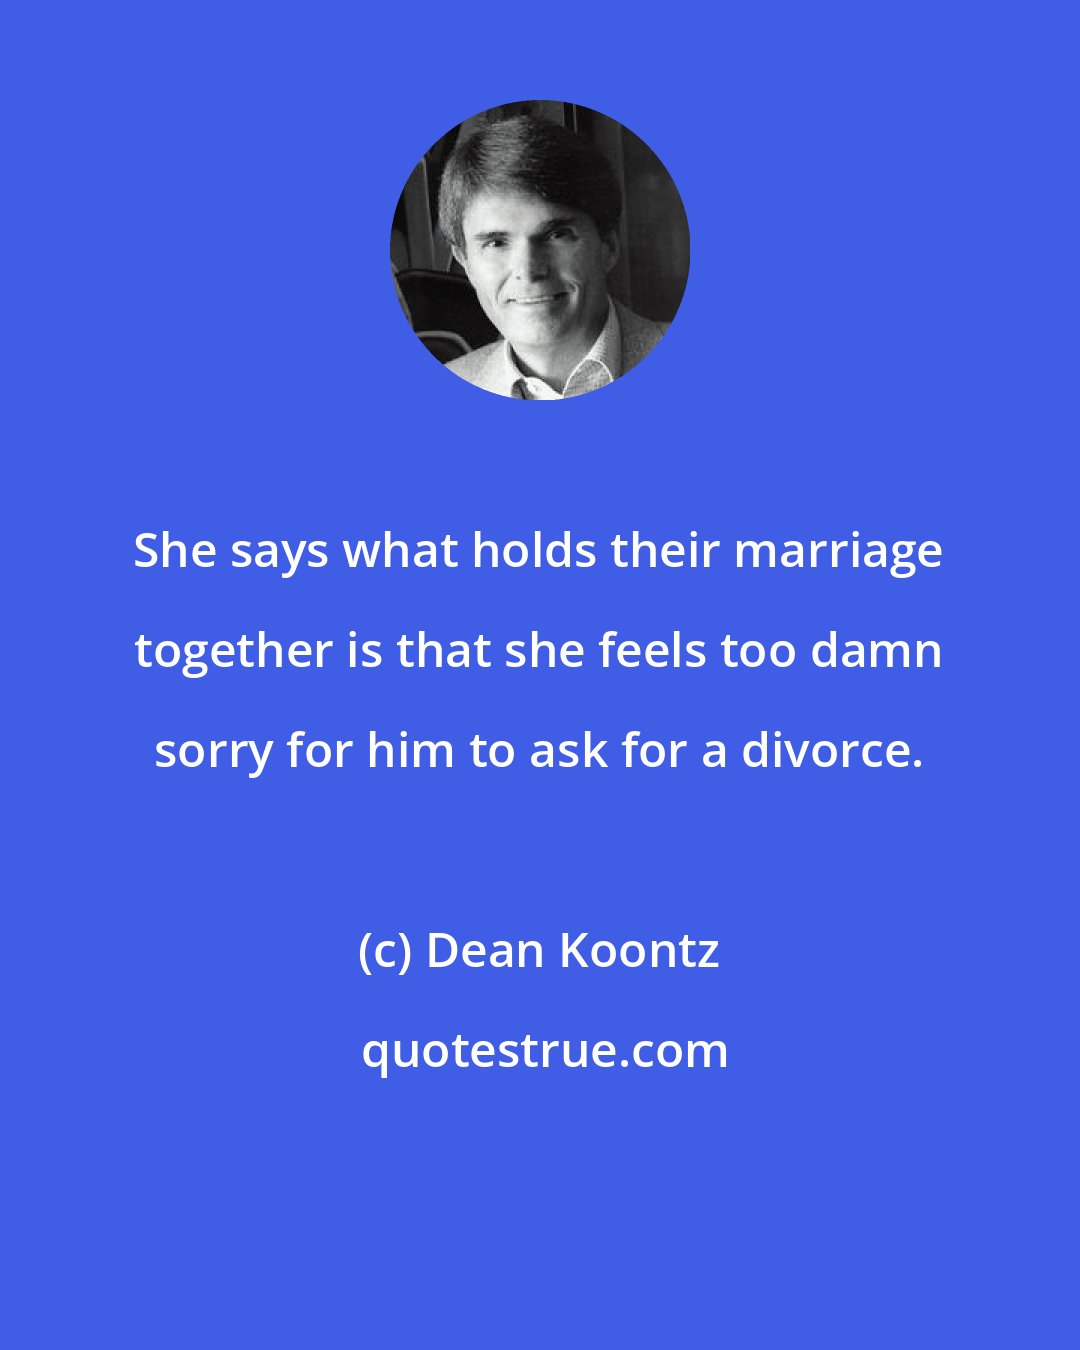 Dean Koontz: She says what holds their marriage together is that she feels too damn sorry for him to ask for a divorce.